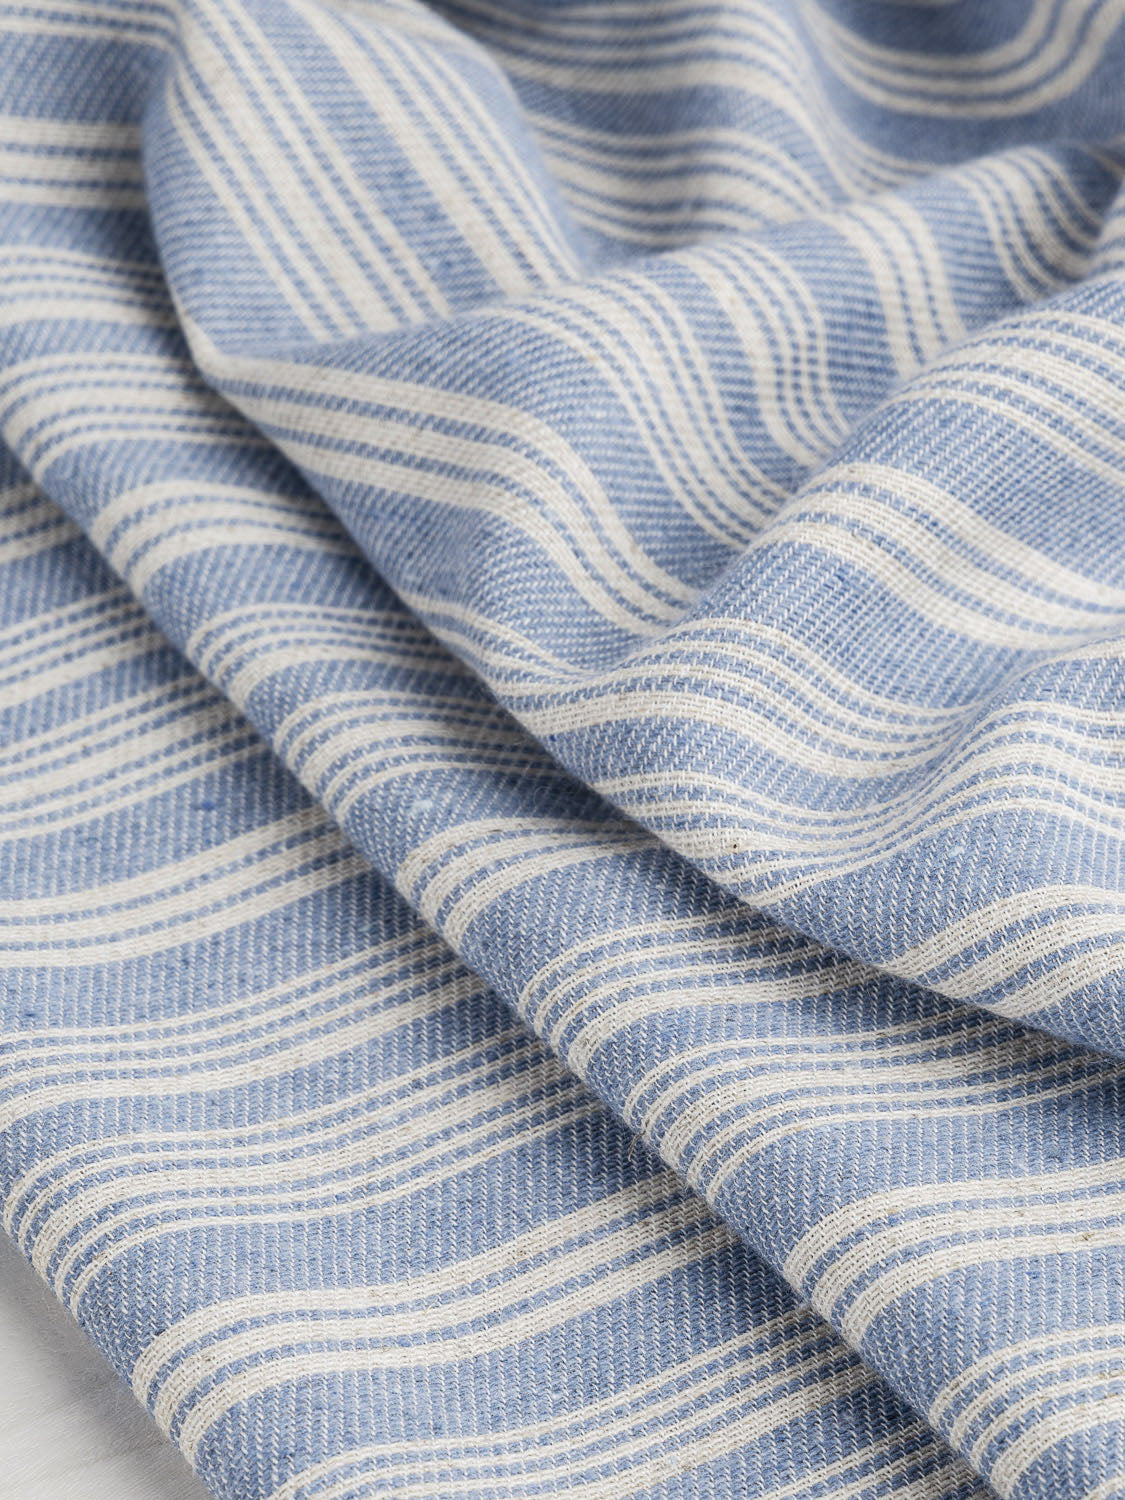 https://corefabricstore.com/cdn/shop/files/F-COT194-001-Striped-Recycled-Cotton-Linen-Twill-Blue-and-Cream-Core-Fabrics-scrunched.jpg?v=1694188946&width=1125